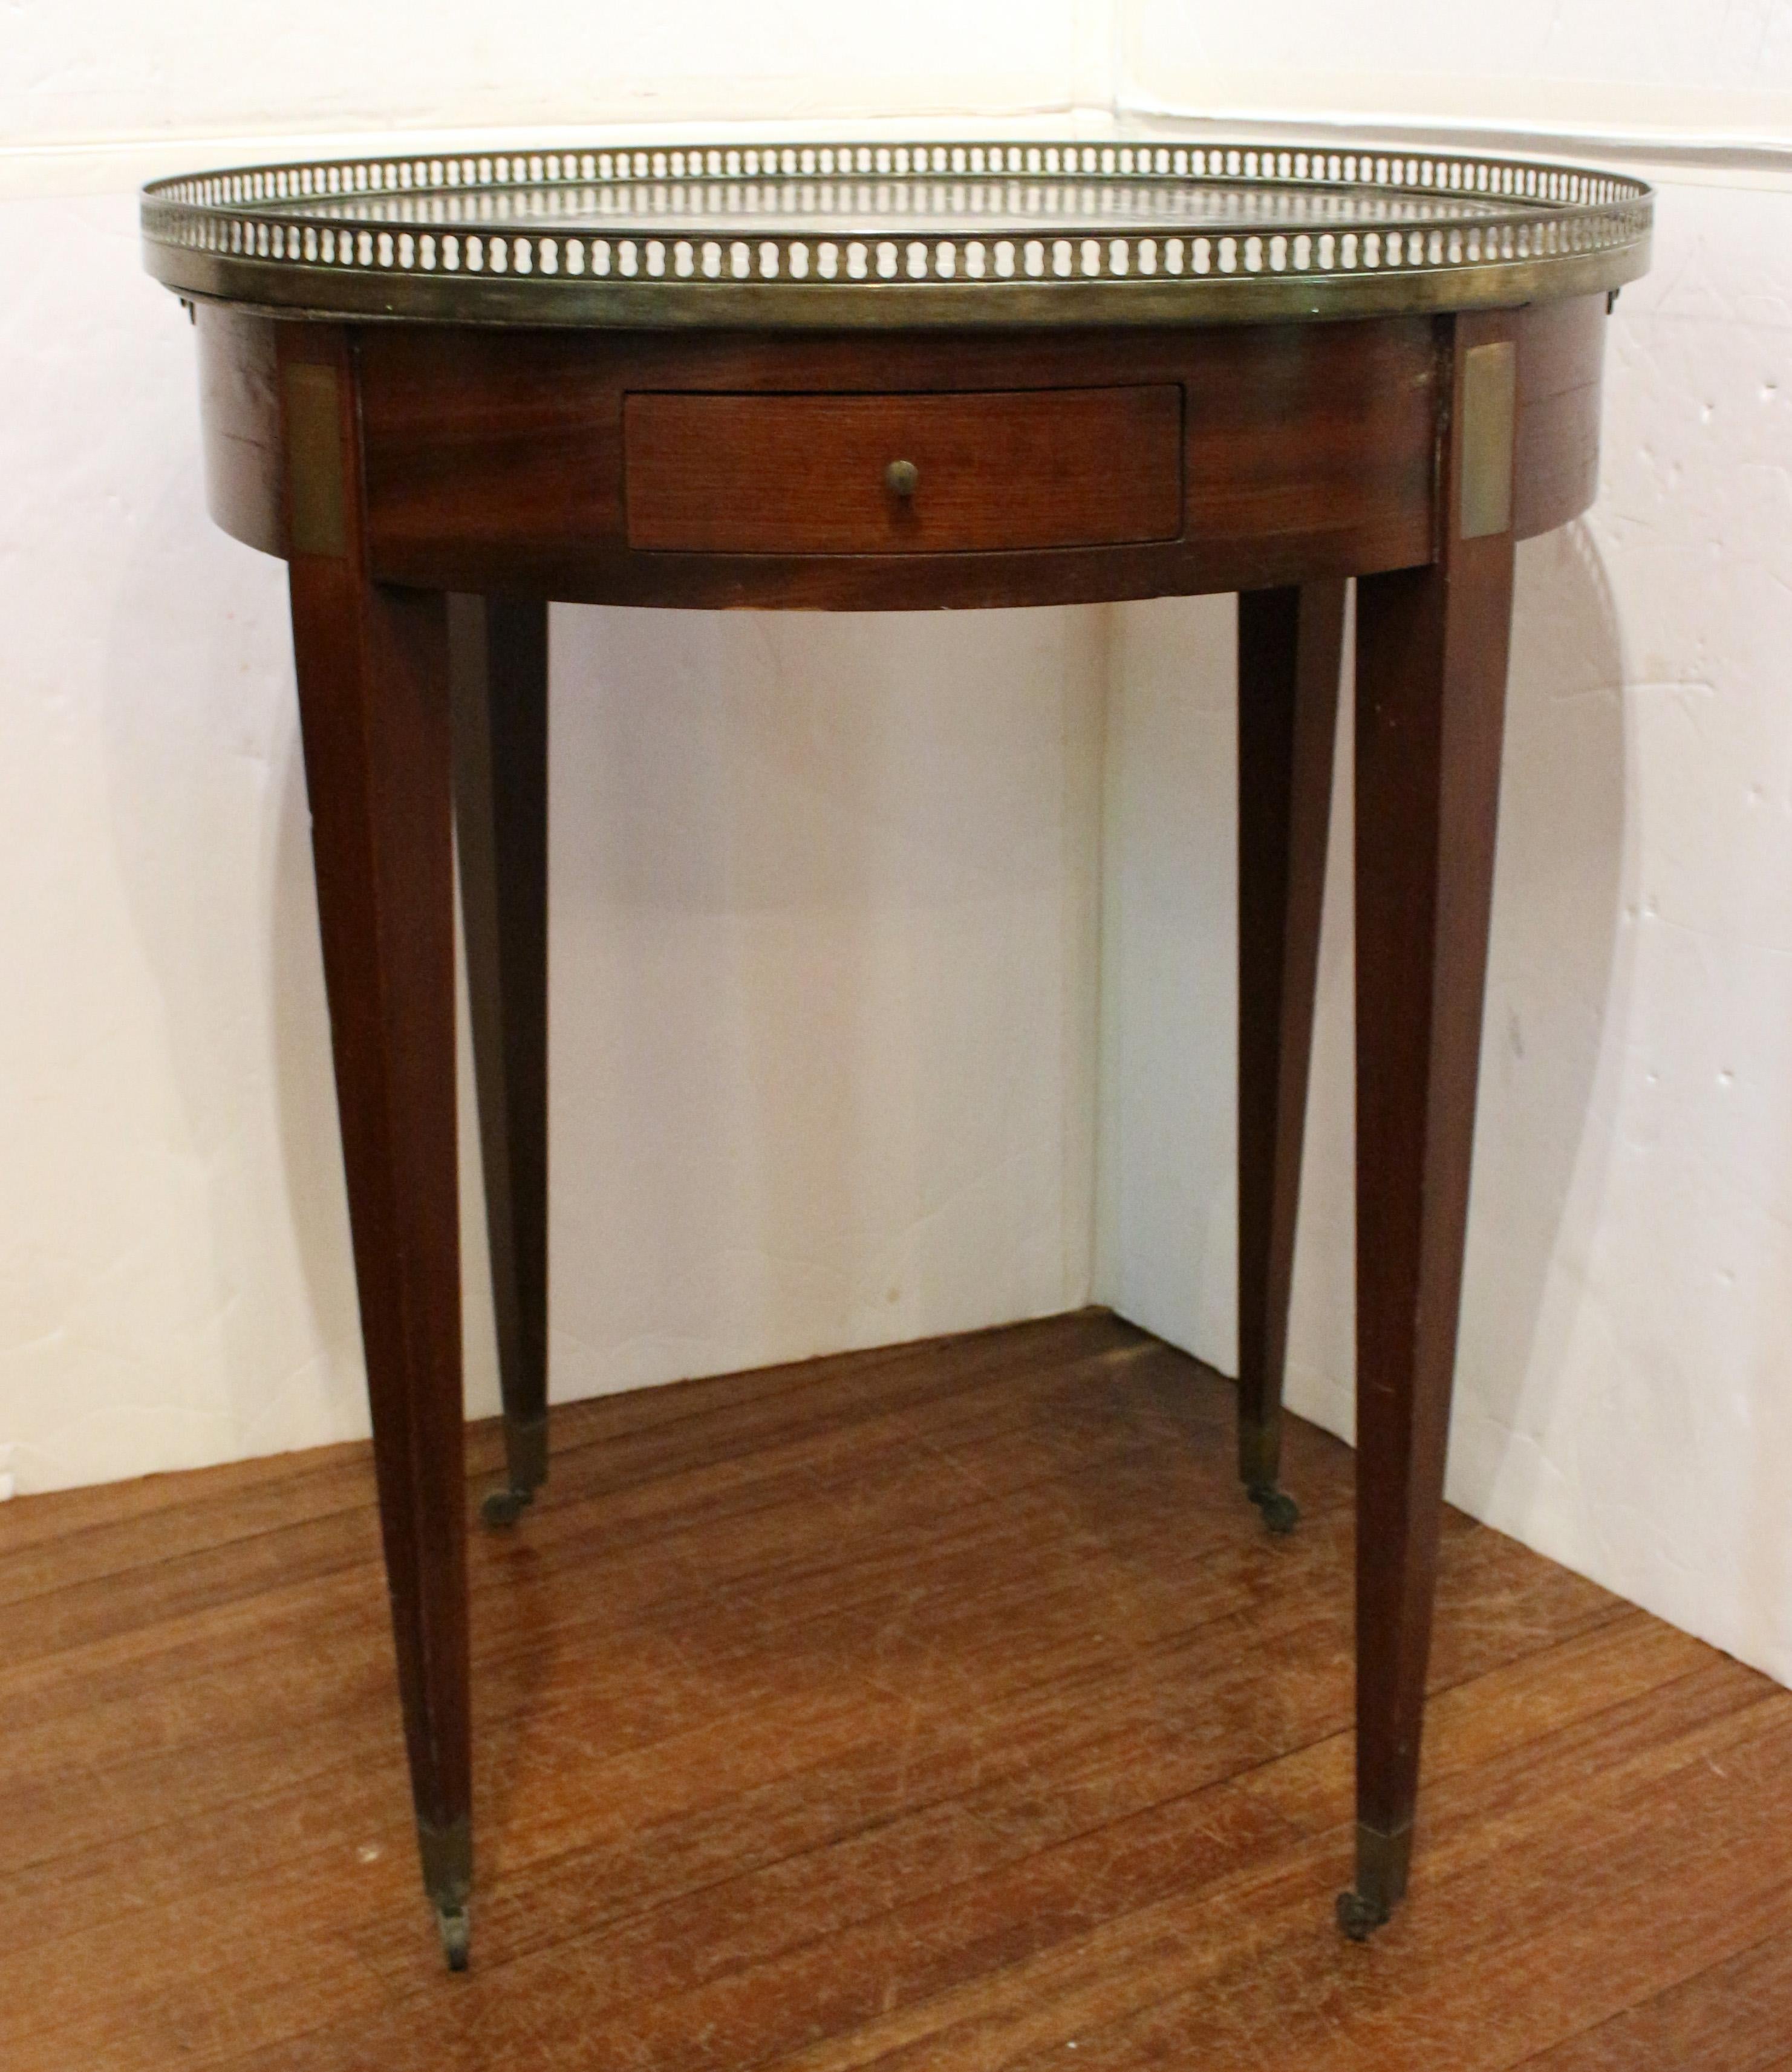 Circa 1890 marble top bouillotte table, Louis XVI style, French. Mahogany with straight, tapered legs ending in sabots & casters. Grey marble with white striations. Brass Gallery. Brass rectangular plaque mounts. Opposing drawers & slides. Brass